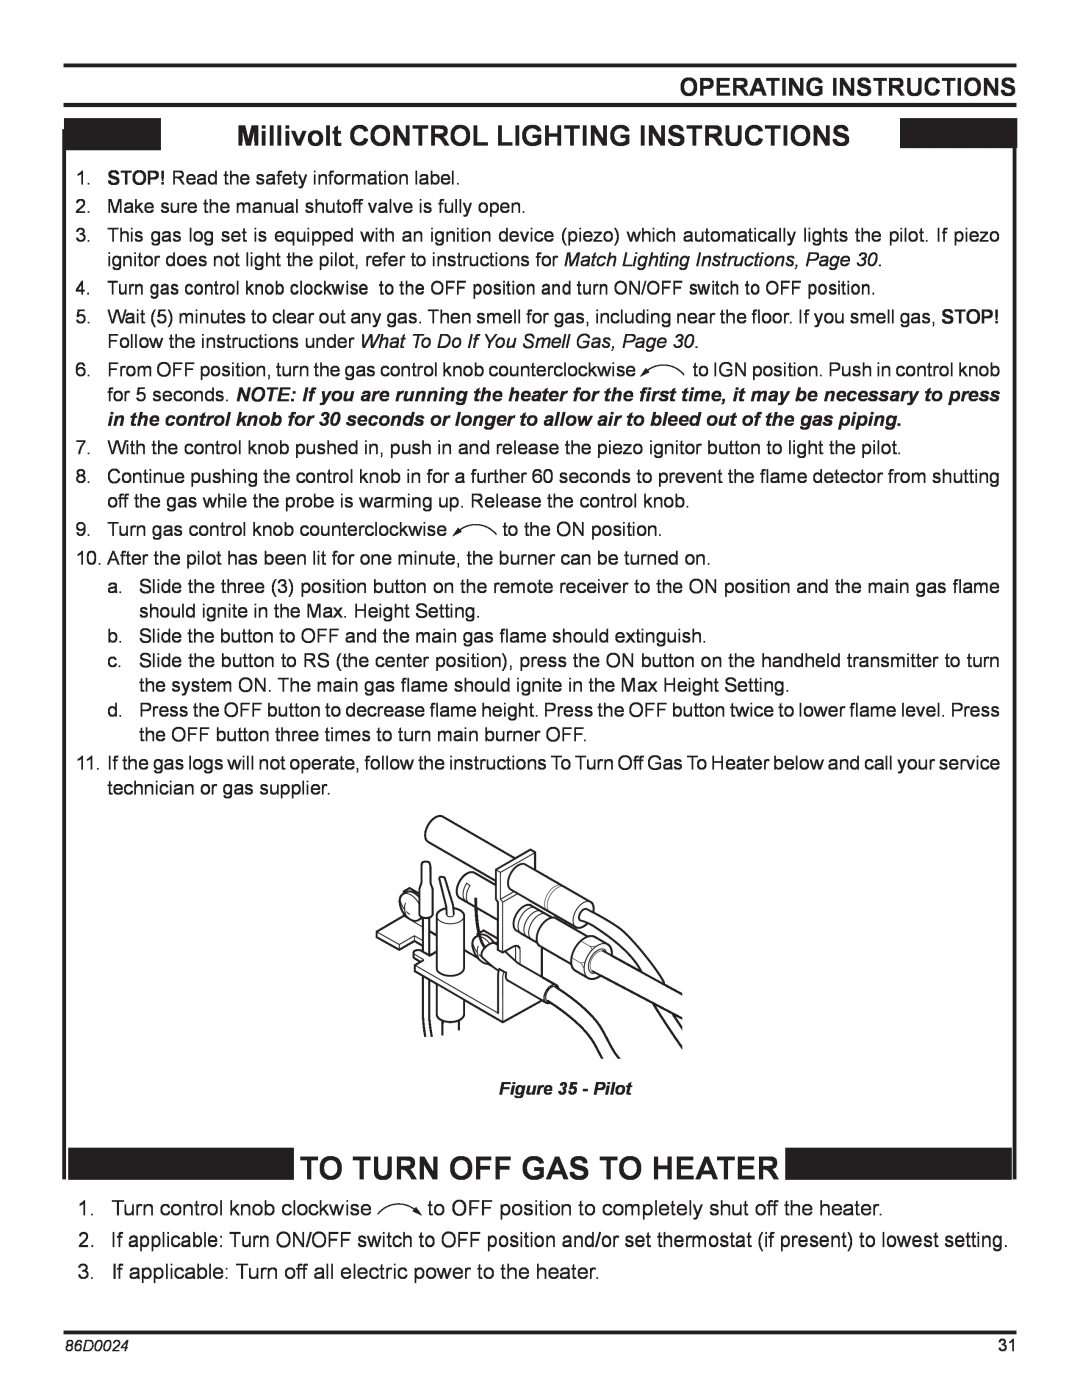 Monessen Hearth MJ27PR, MJ27NR To Turn Off Gas To Heater, Millivolt CONTROL LIGHTING INSTRUCTIONS, Operating Instructions 